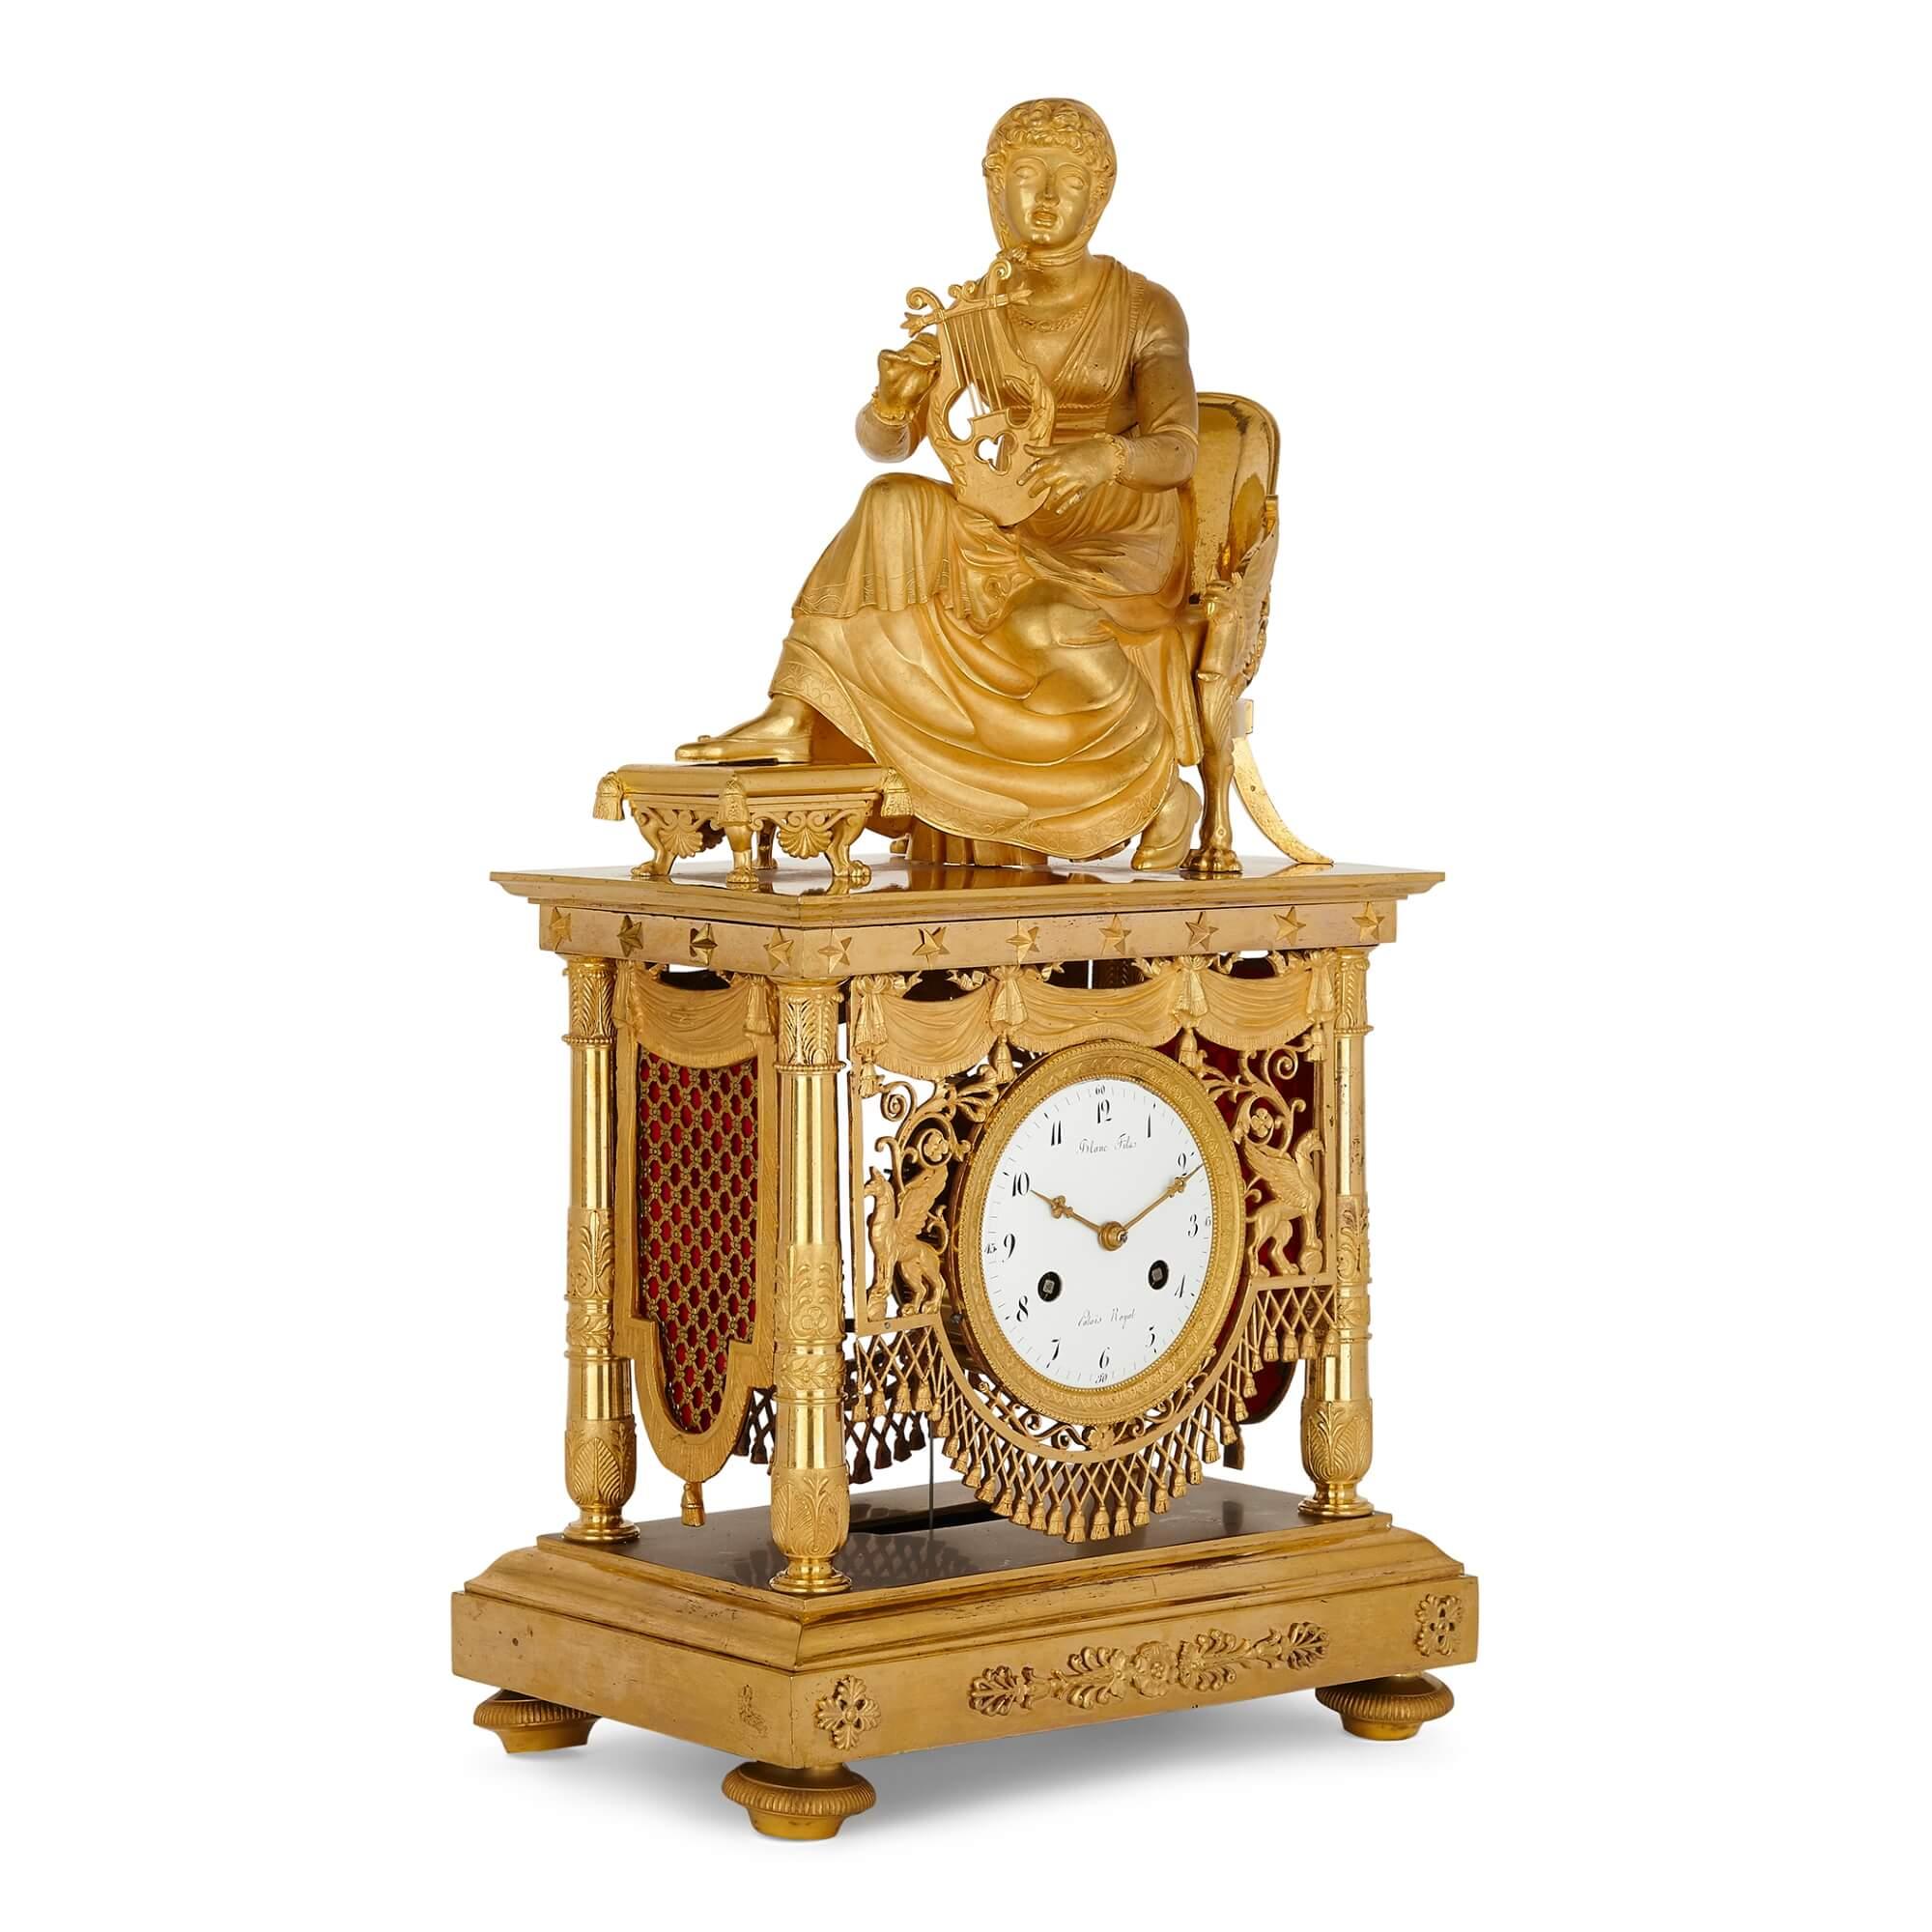 Large Empire period gilt bronze mantel clock
French, early 19th Century
Measures: Height 52cm, width 28cm, depth 17.5cm

This superb Empire period mantel clock is crafted form gilt bronze. The clock features a large surmount of Erato, the Muse